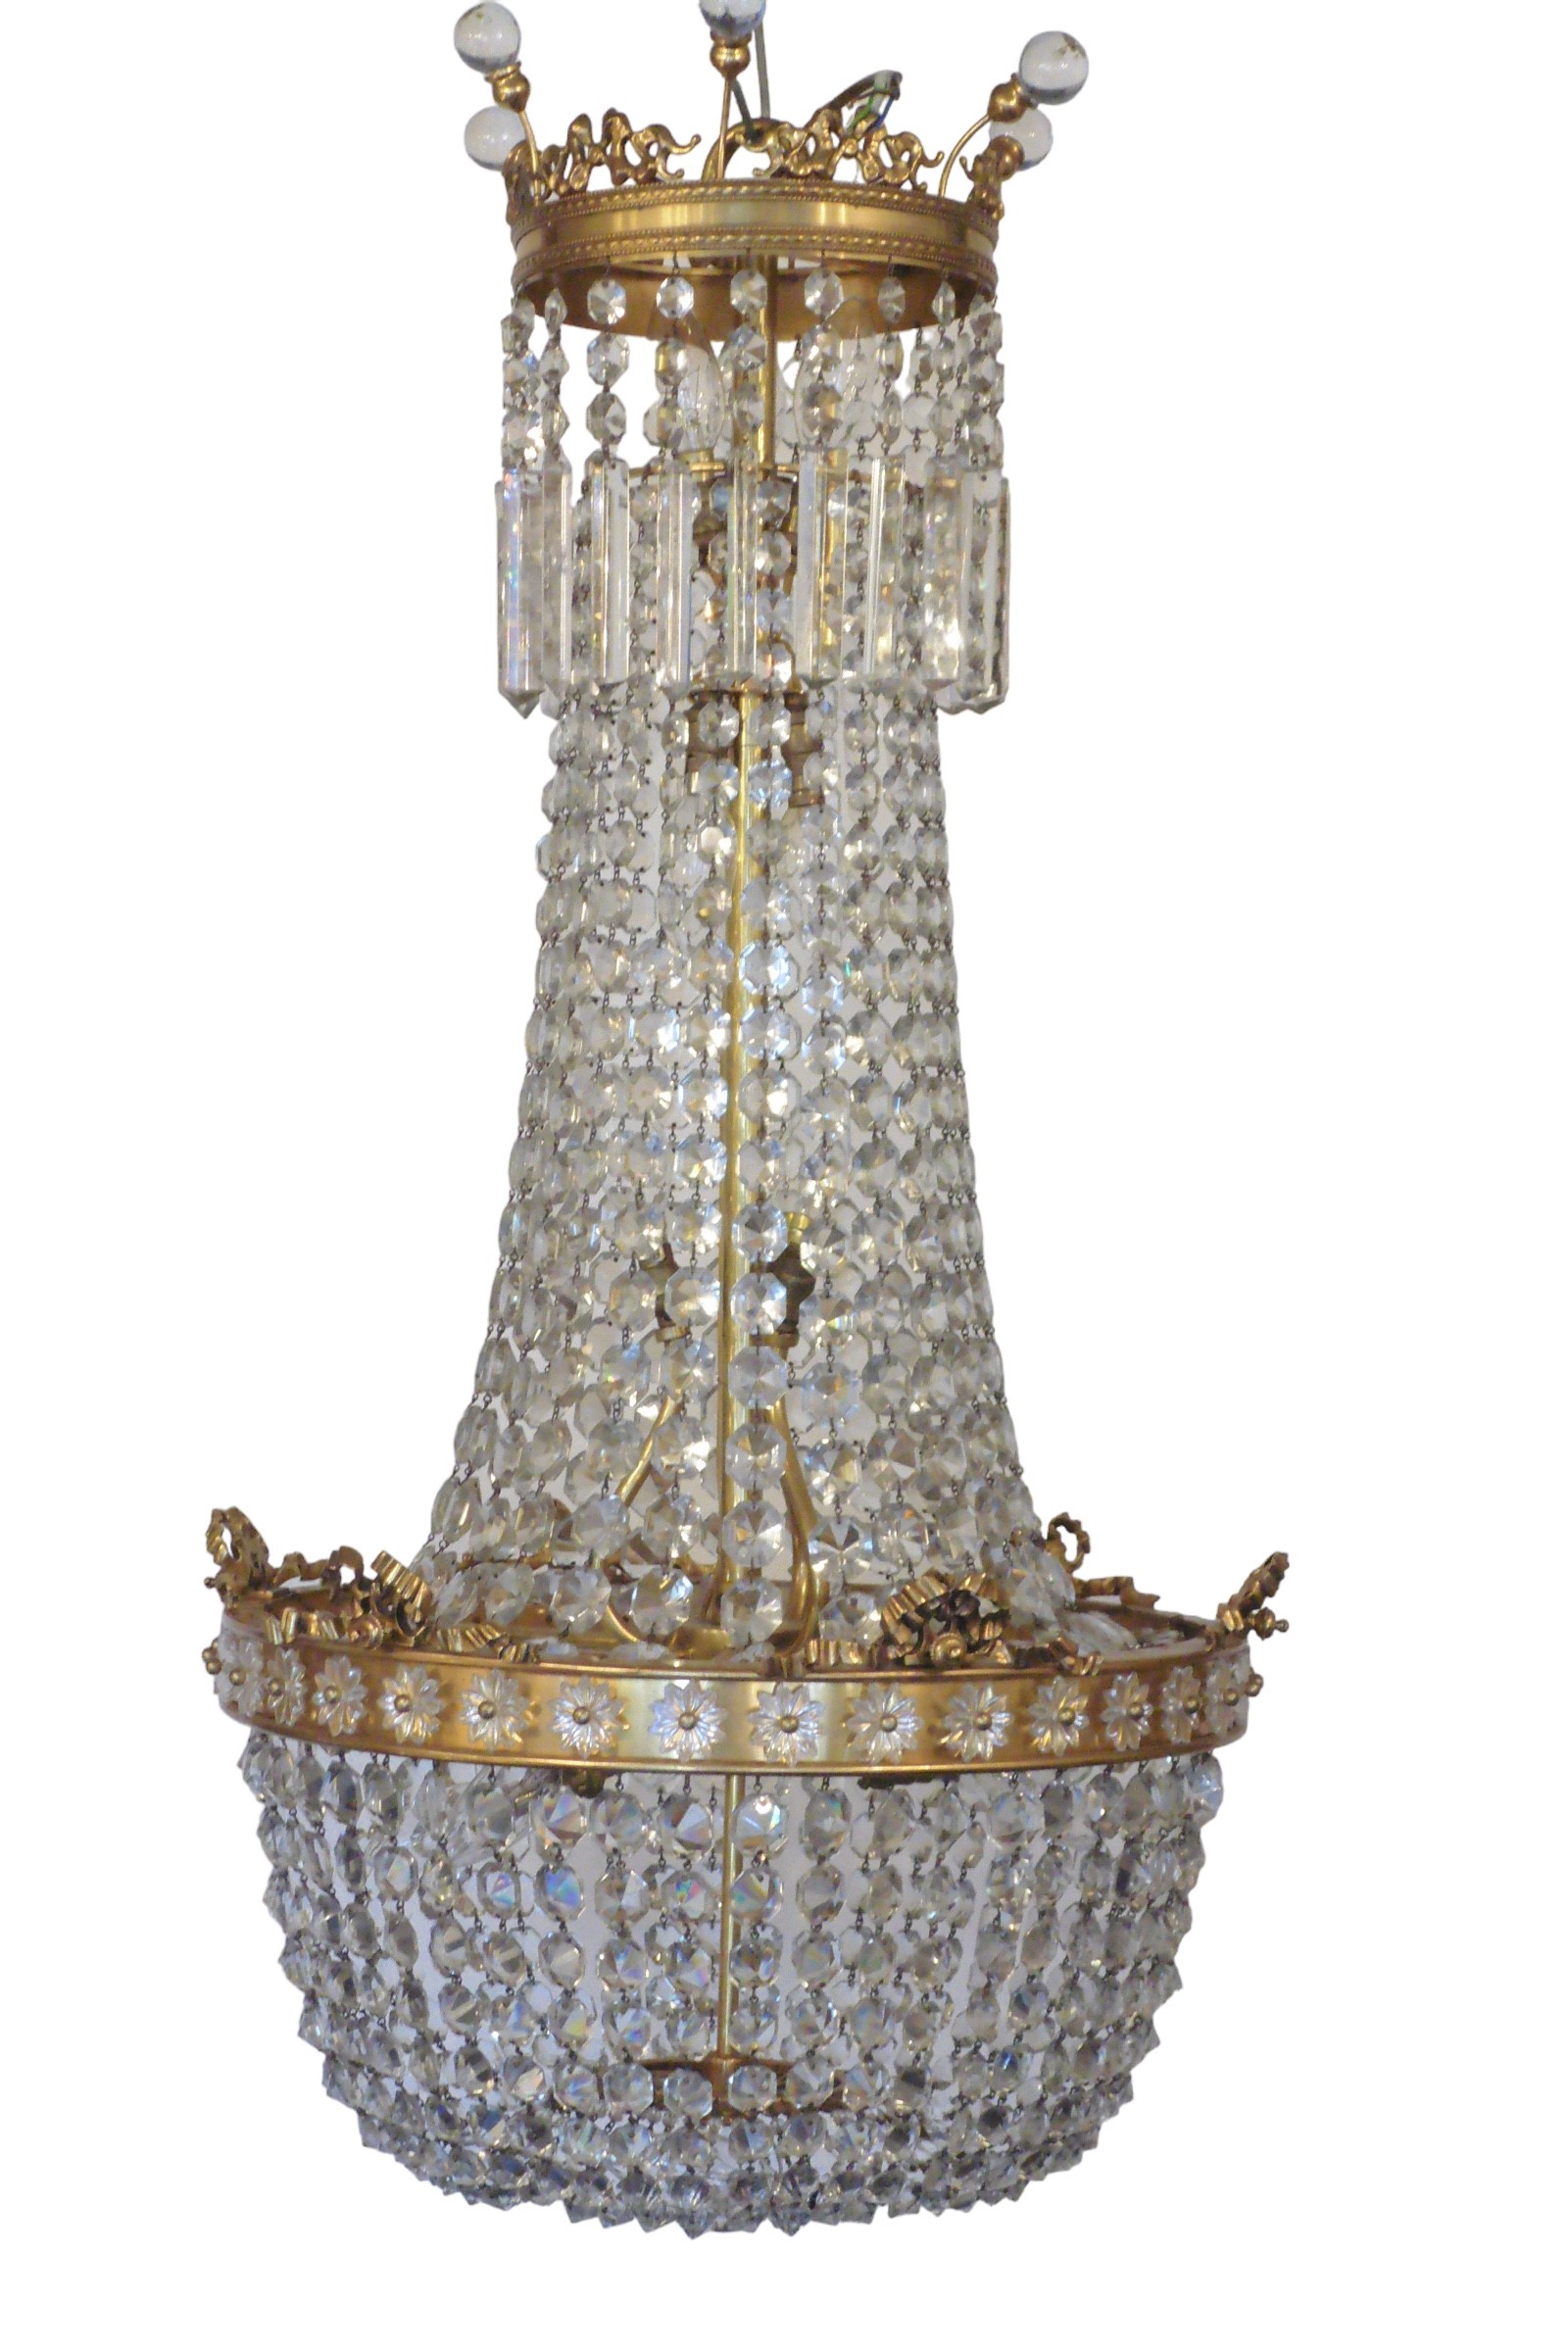 A FINE LARGE LATE 19TH/EARLY 20TH CENTURY GILT BRONZE AND GLASS BASKET CHANDELIER Decorated with